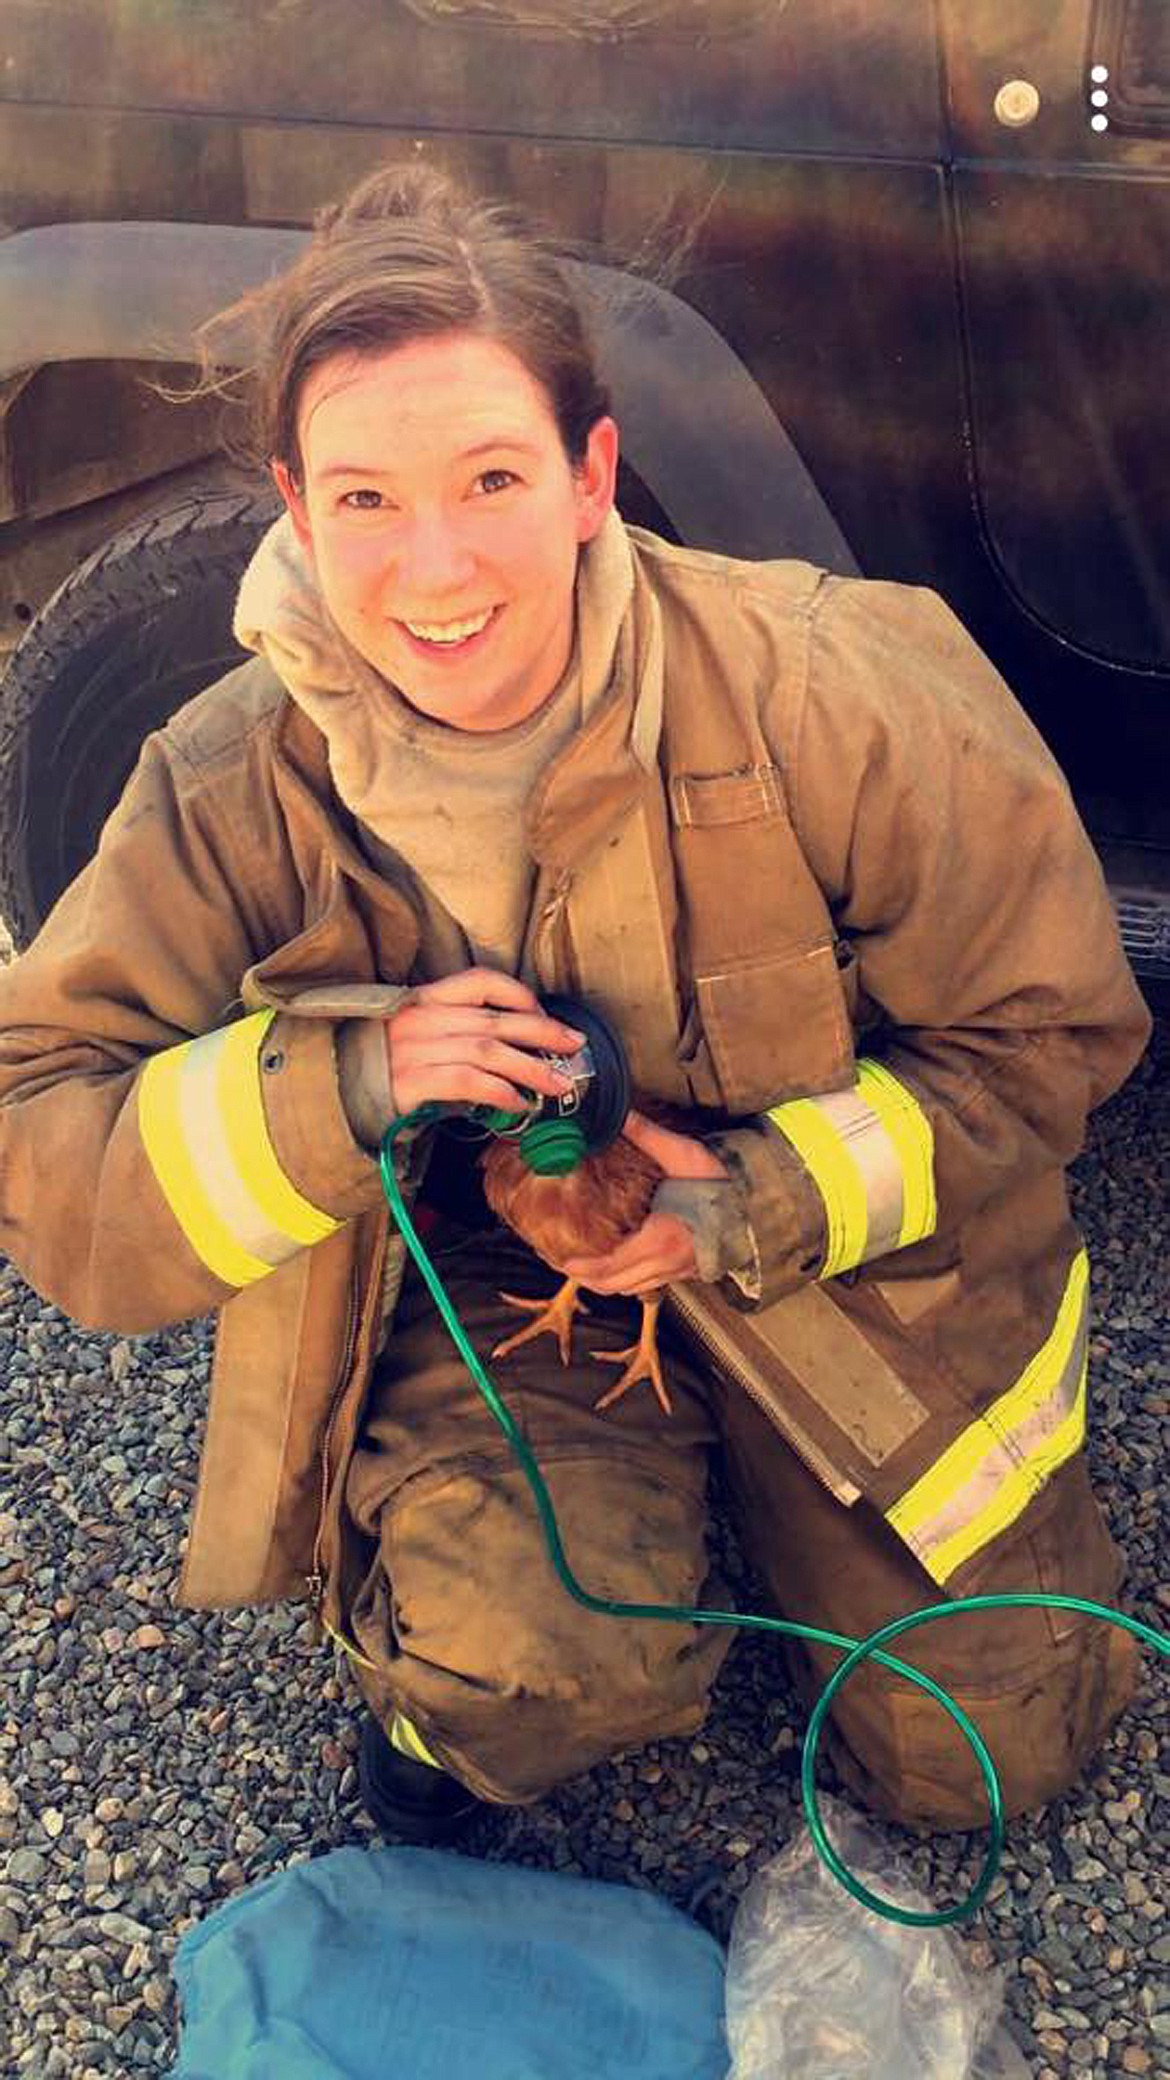 Evergreen Fire Rescue Lt. Jackie Smith uses an artificial breathing device to help revive some chickens that were overcome by smoke inhalation in a residential fire Tuesday on Van Sant Road east of Kalispell. (Photo provided by Evergreen Fire Rescue)